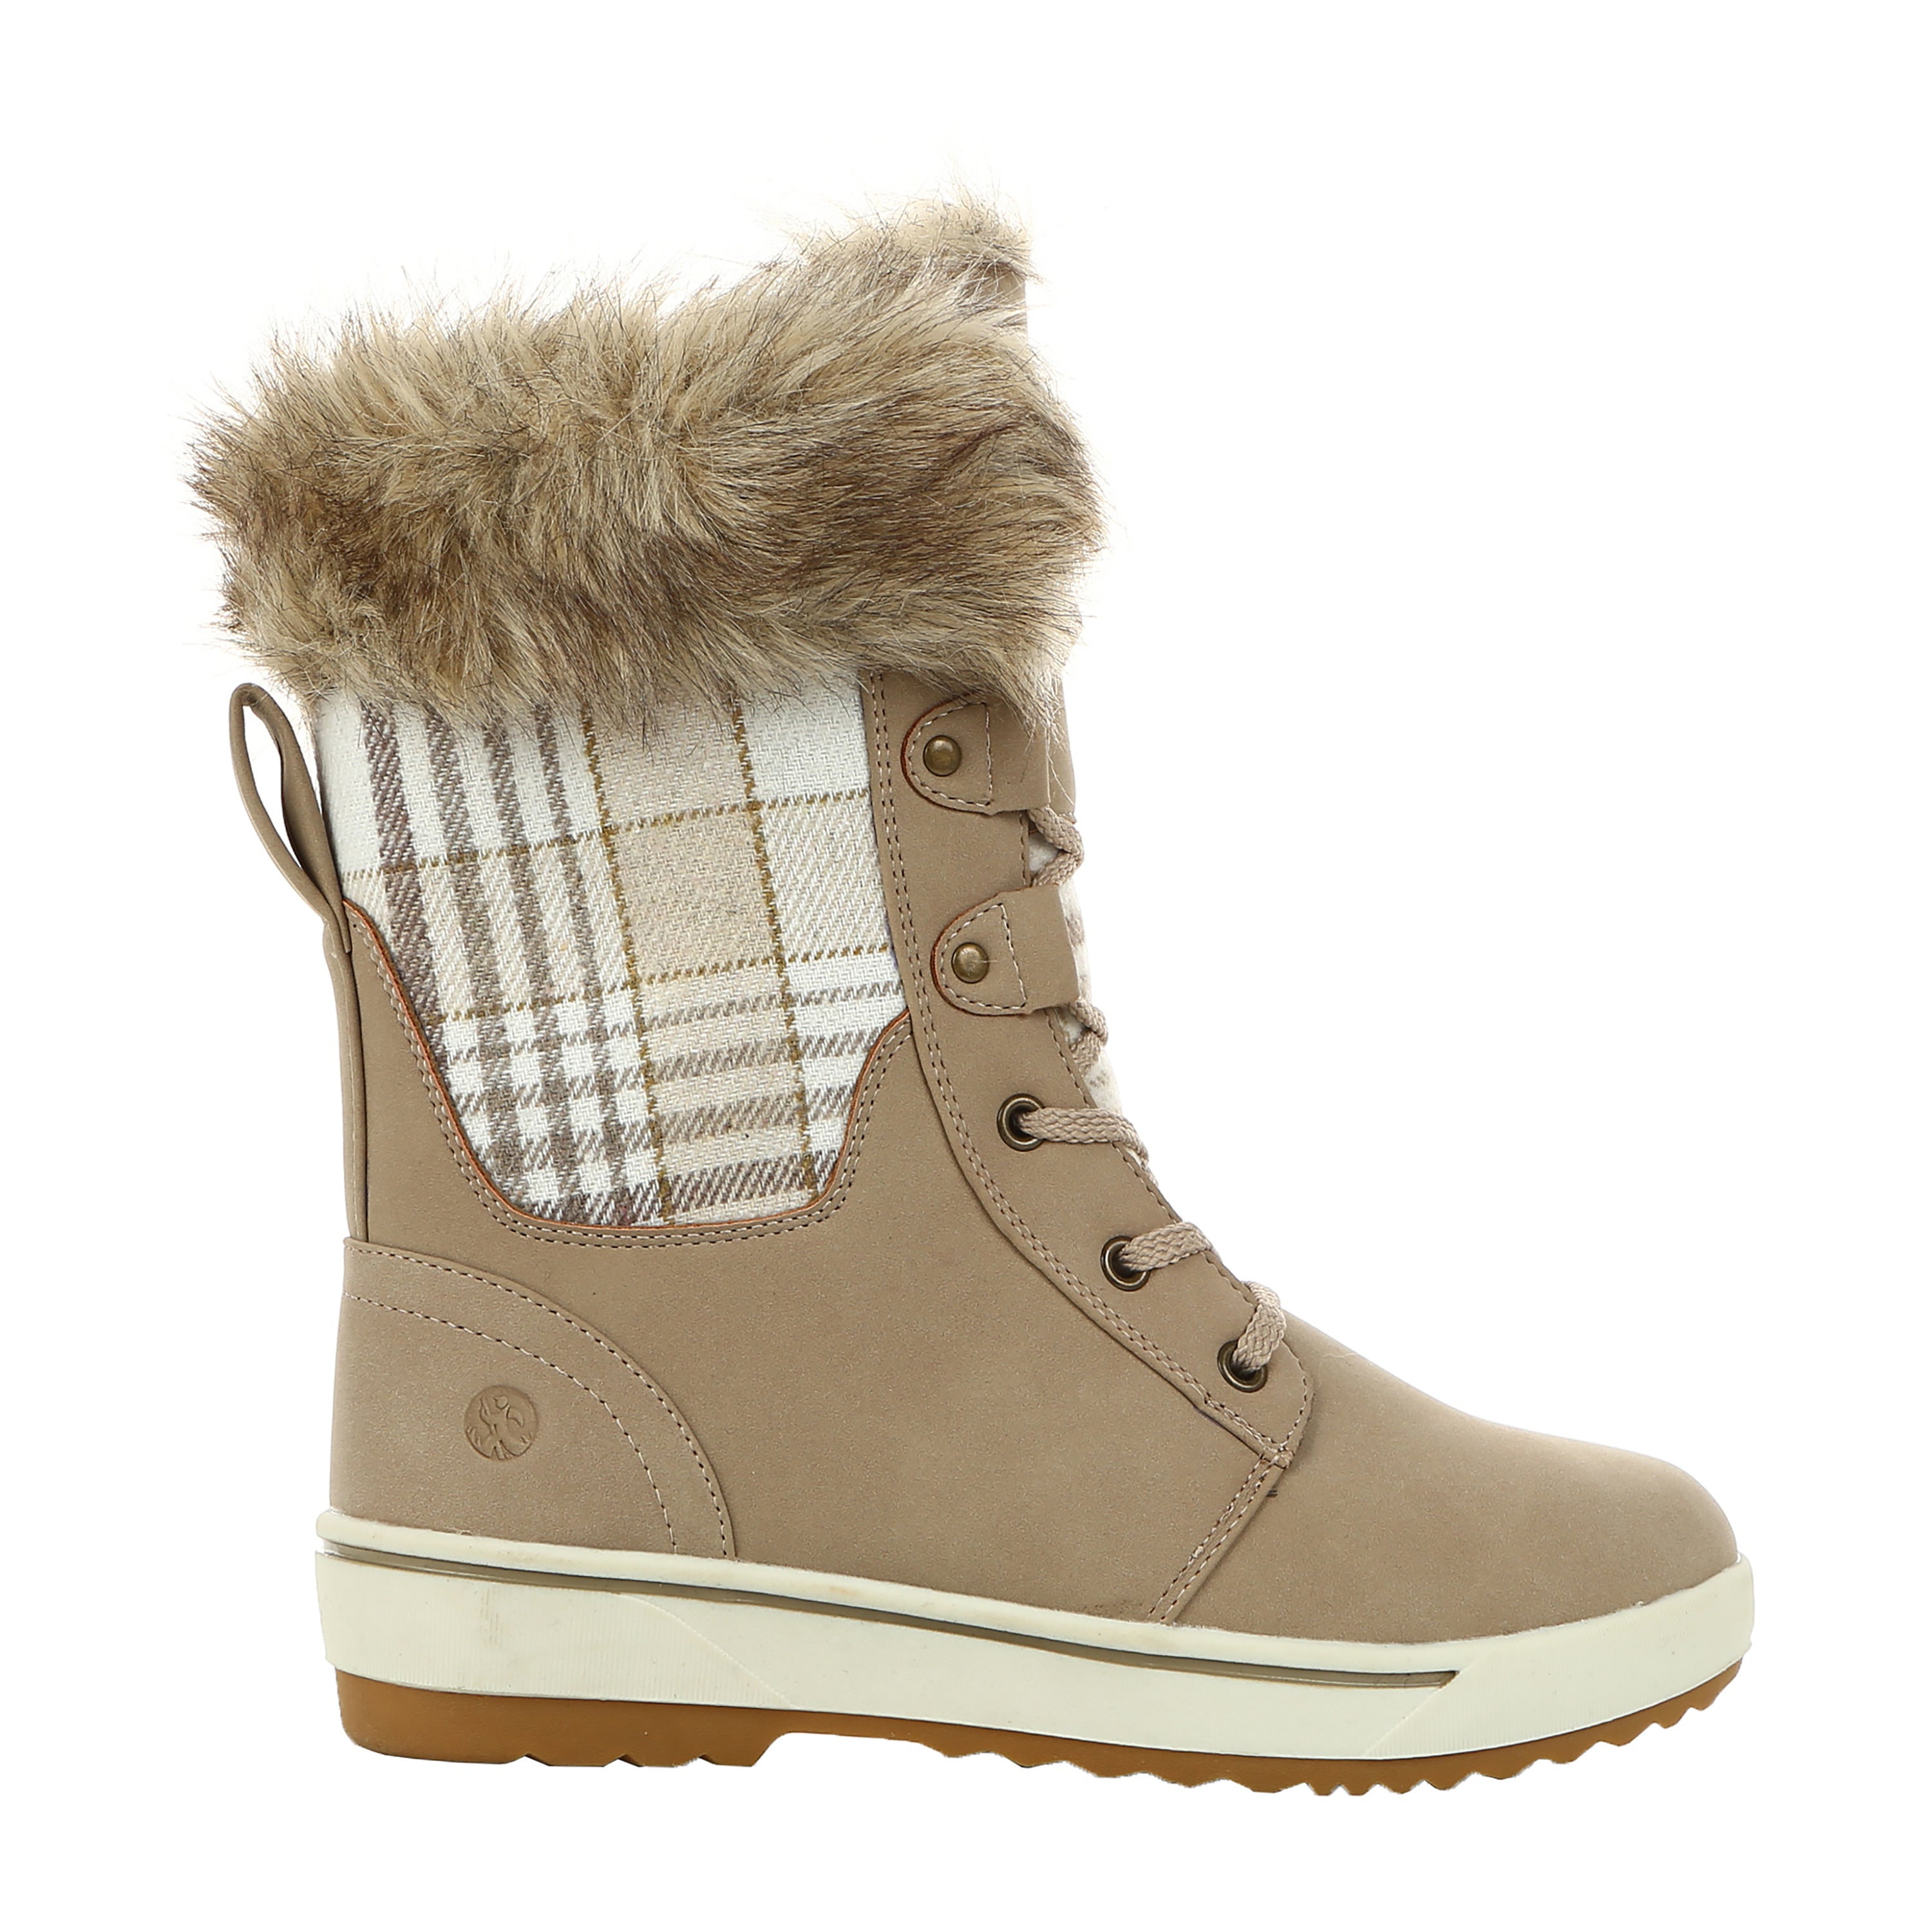 Women's Brookelle SE Cold Weather Fashion Boot